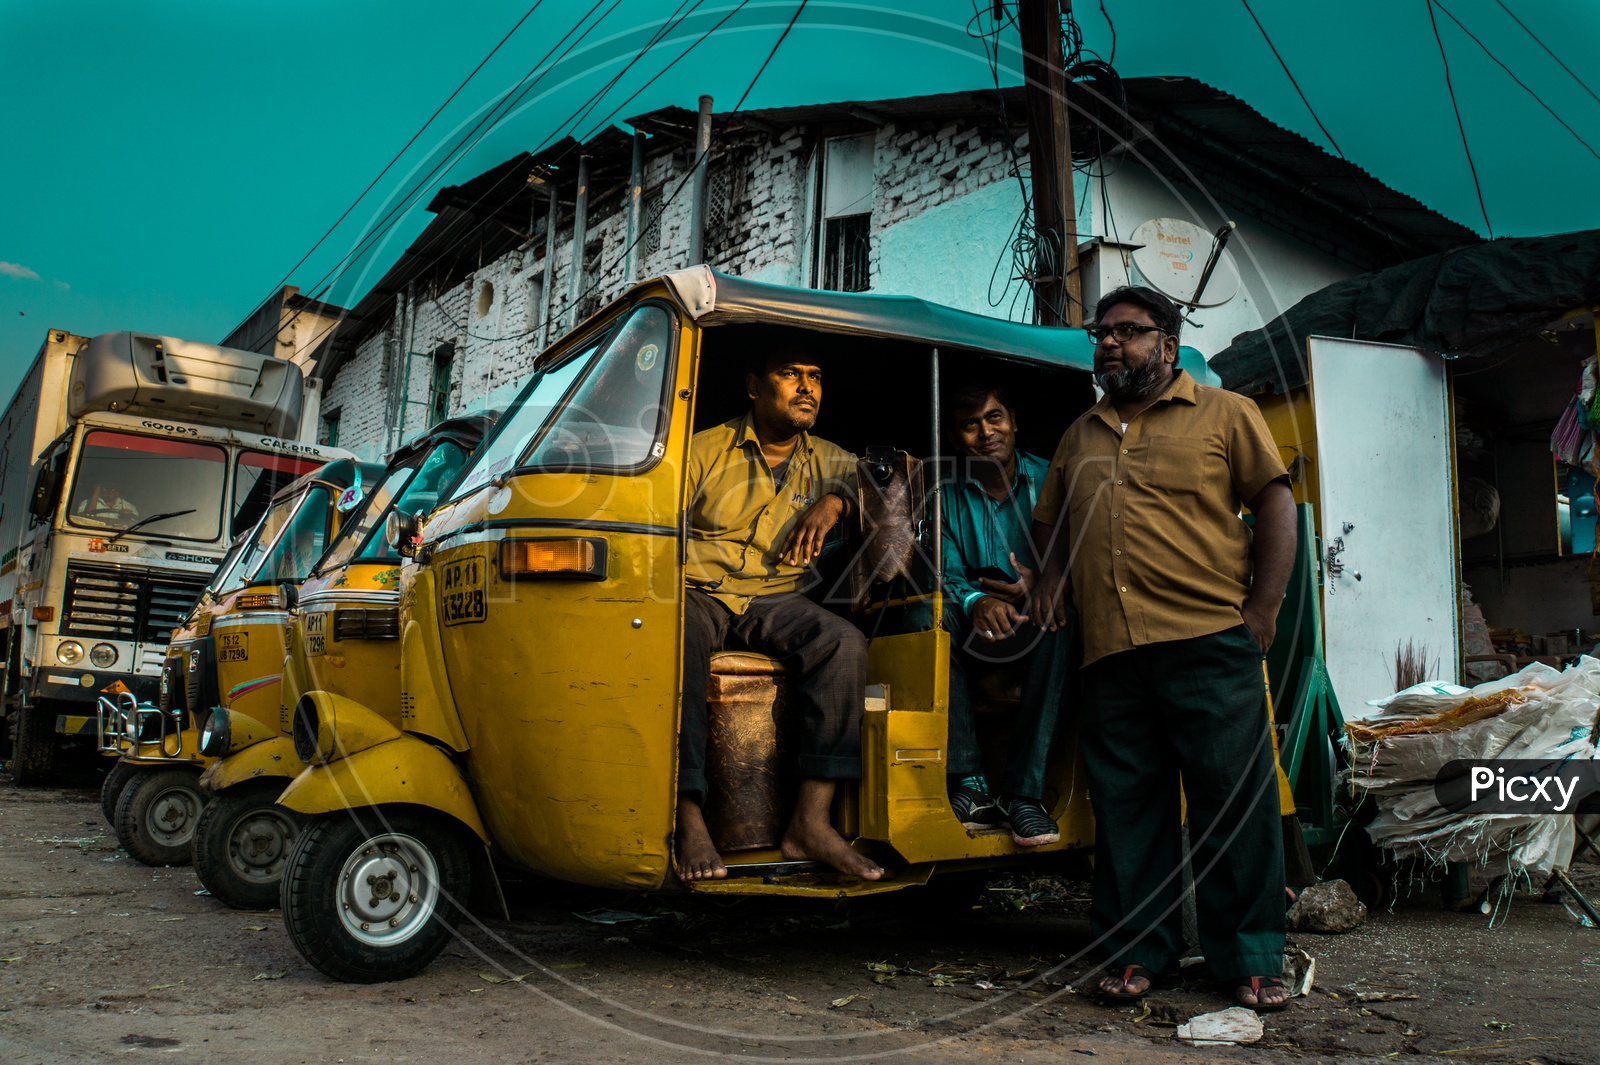 Autos in Auto stand, auto drivers